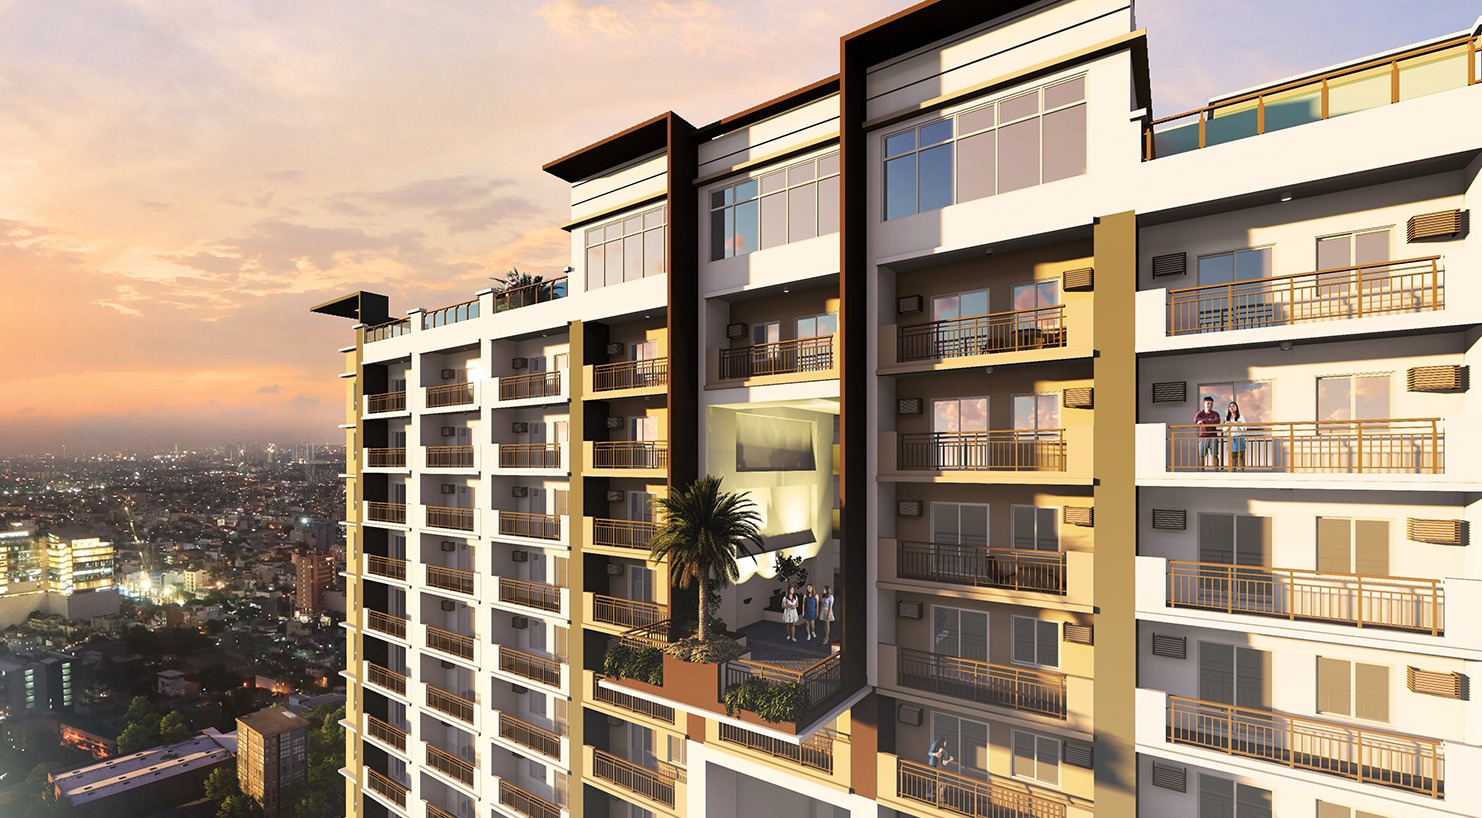 dmci-homes-expands-condo-portfolio-in-the-high-market-value-area-of-pasay-city-1566193374848